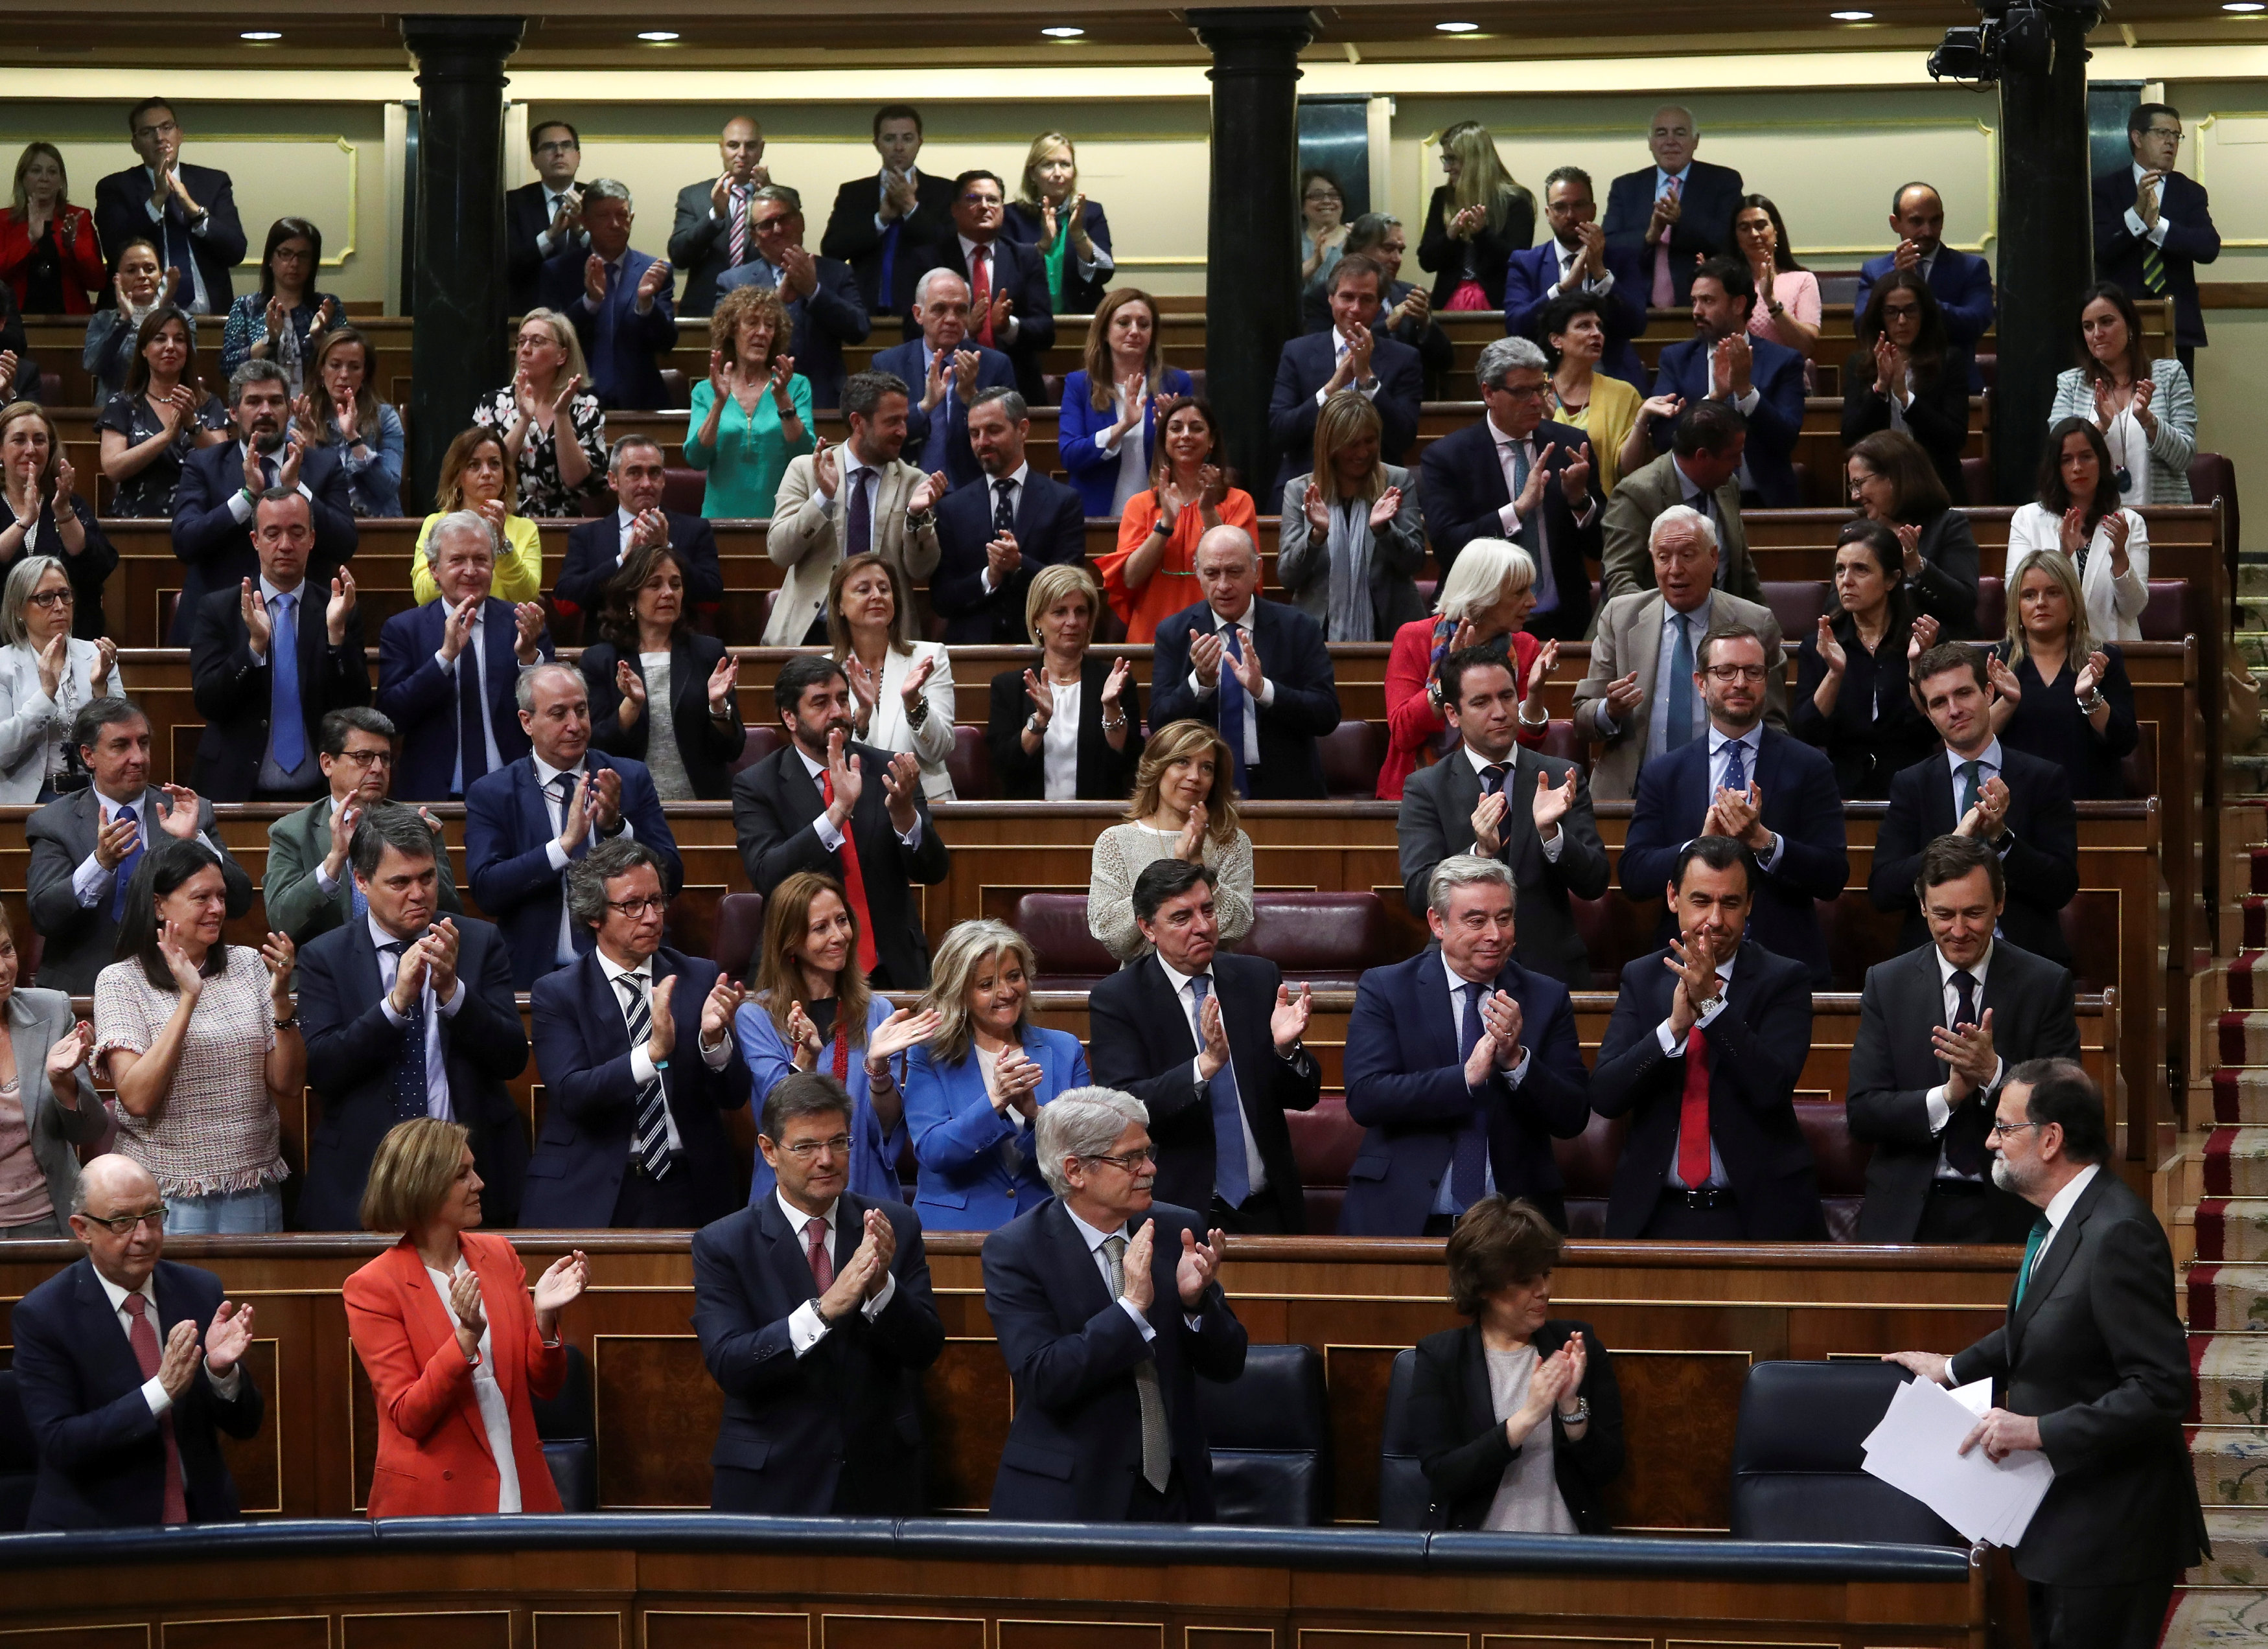 Spain's Prime Minister Mariano Rajoy is applauded by party members during a motion of no confidence debate at Parliament in Madrid (REUTERS/Sergio Perez)